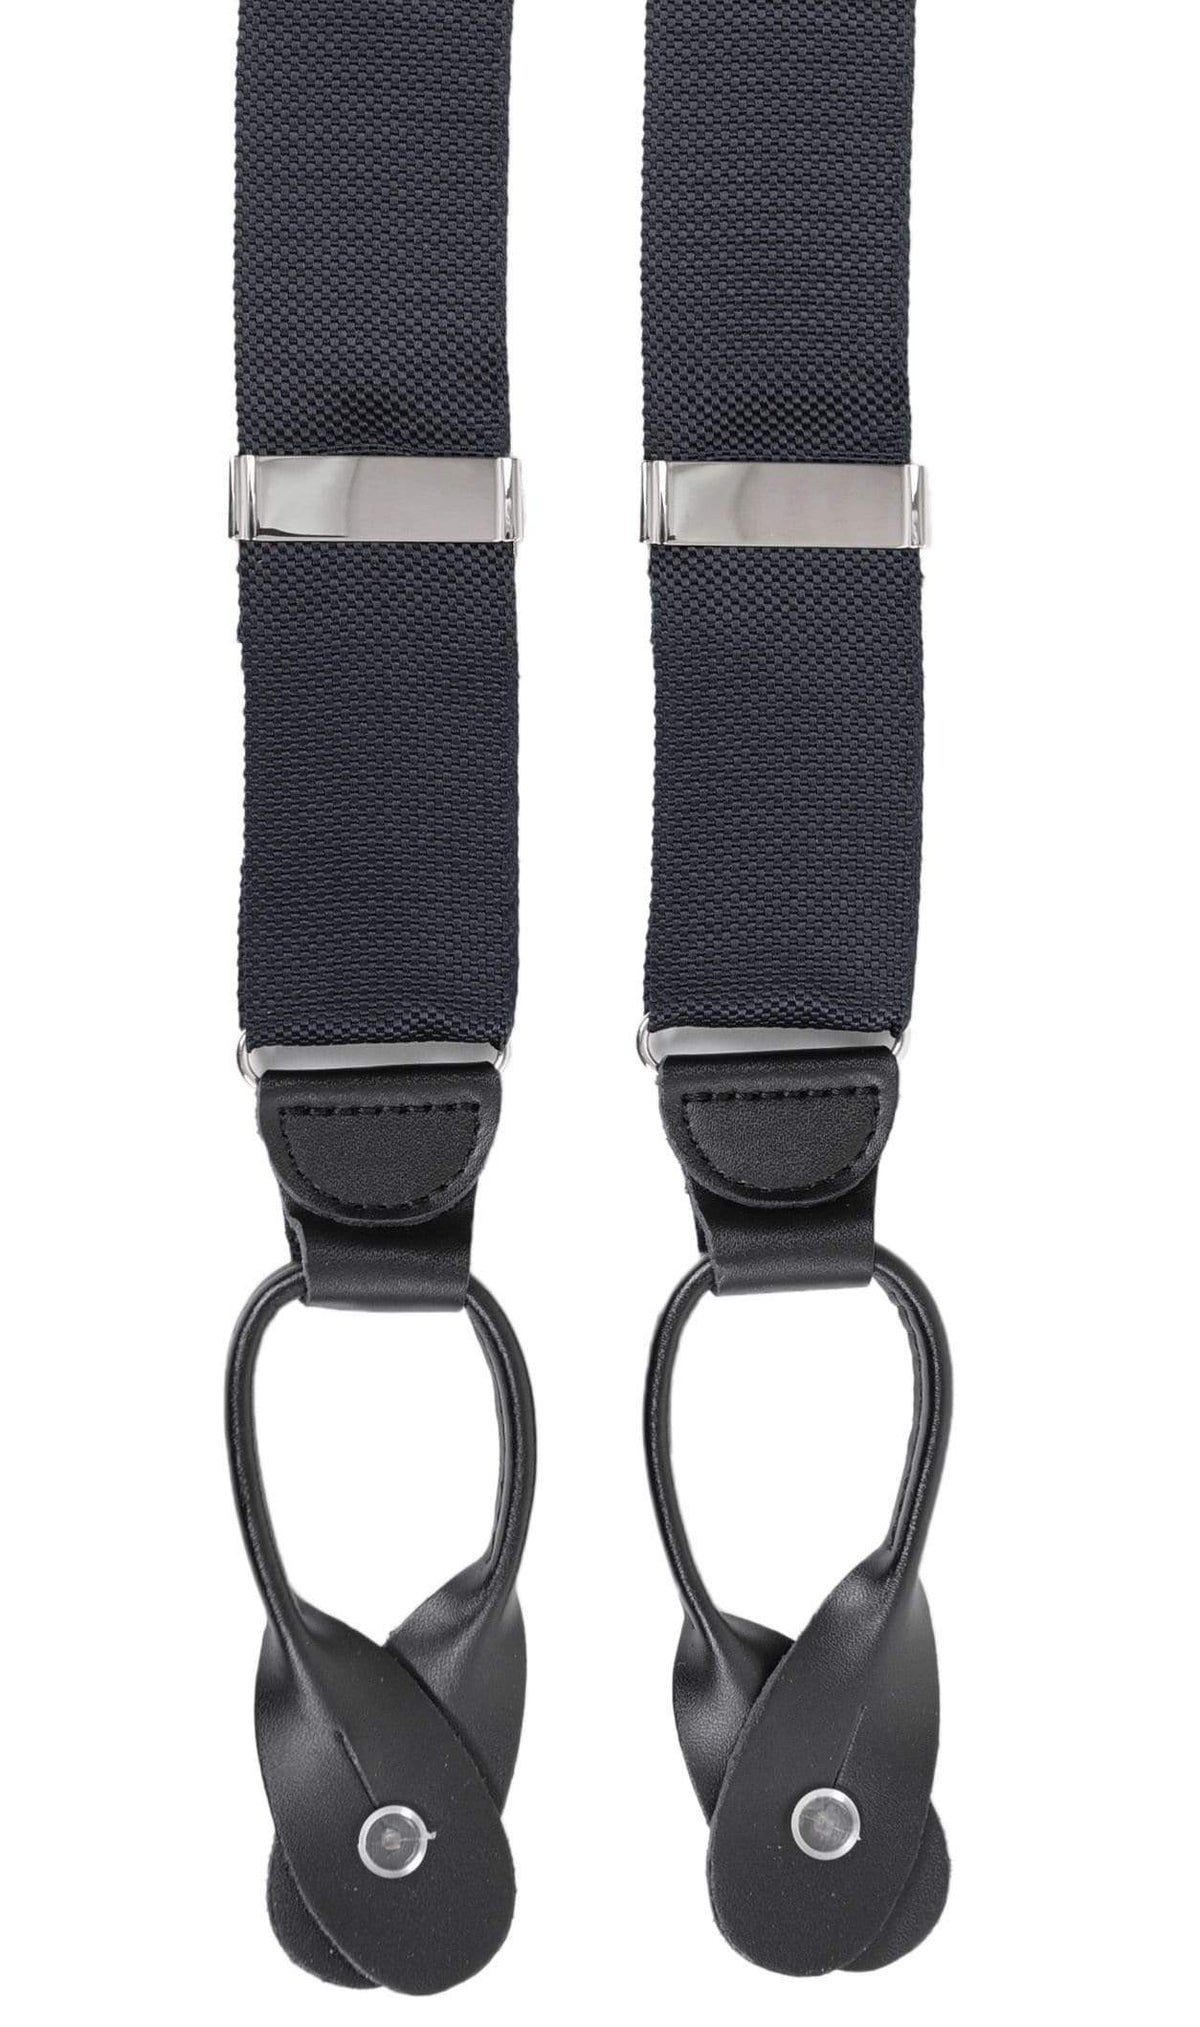 STATUS Polyester Black Kennedy Button Suspenders - The Suit Depot